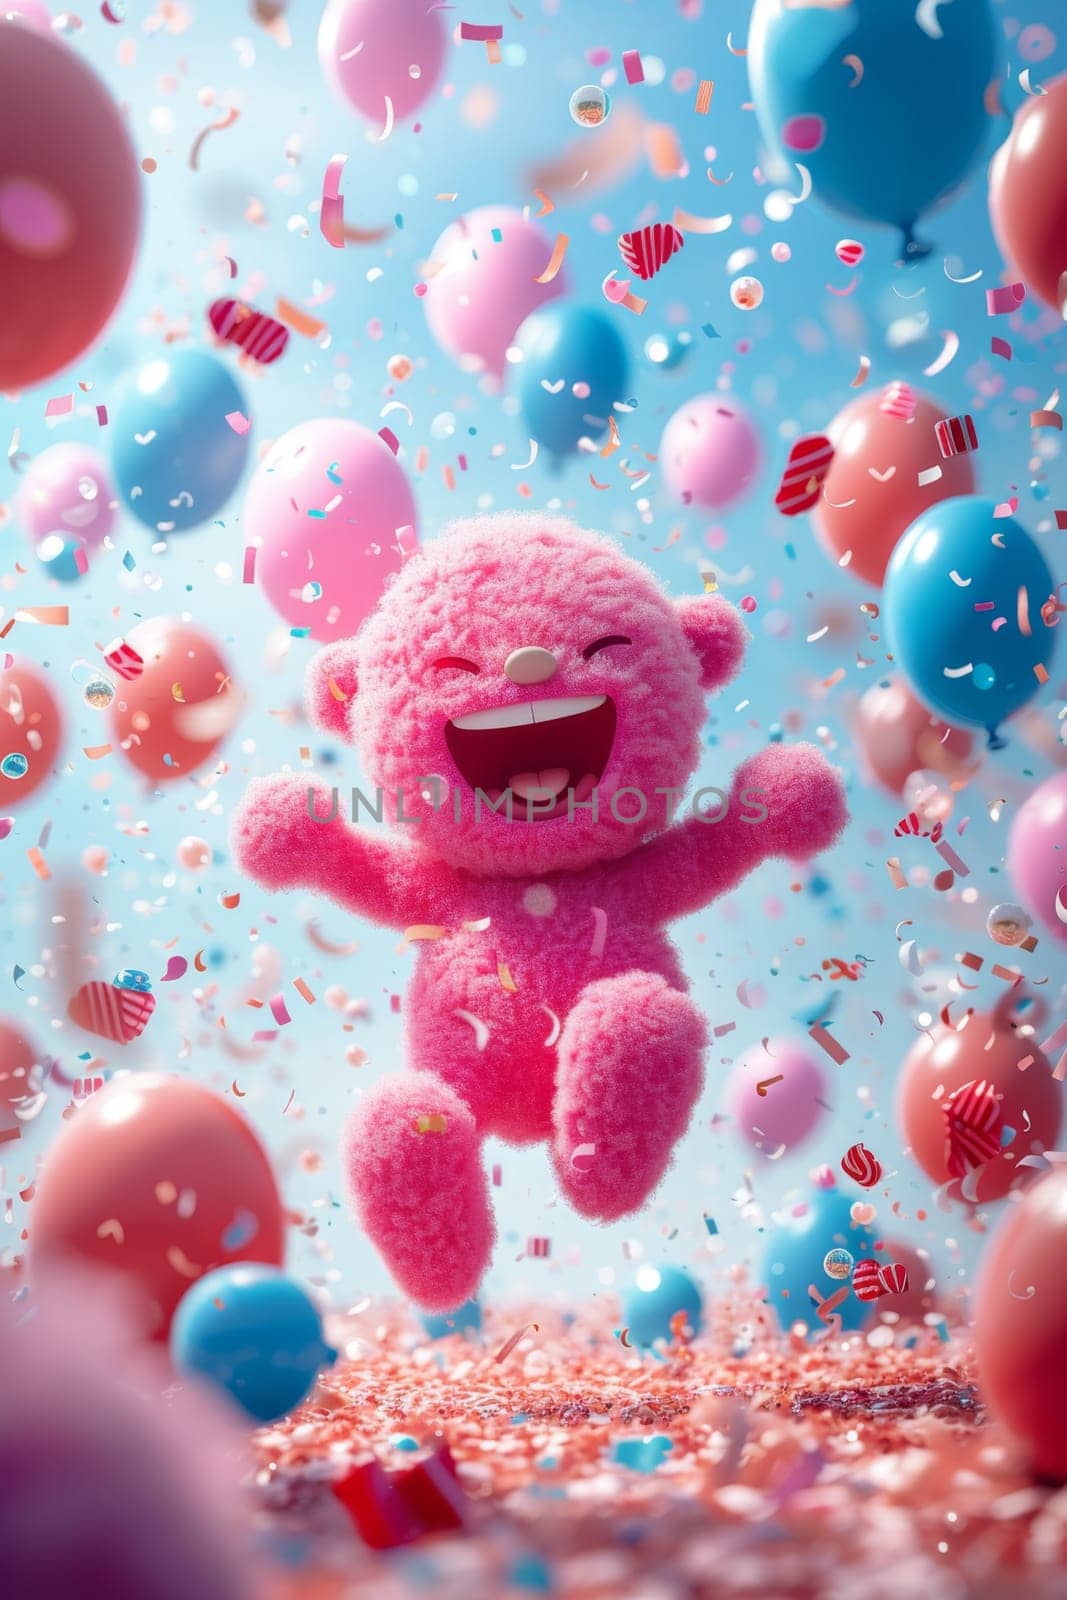 A happy cartoon fluffy character runs against the background of festive balloons. The concept of the holiday. 3d illustration by Lobachad